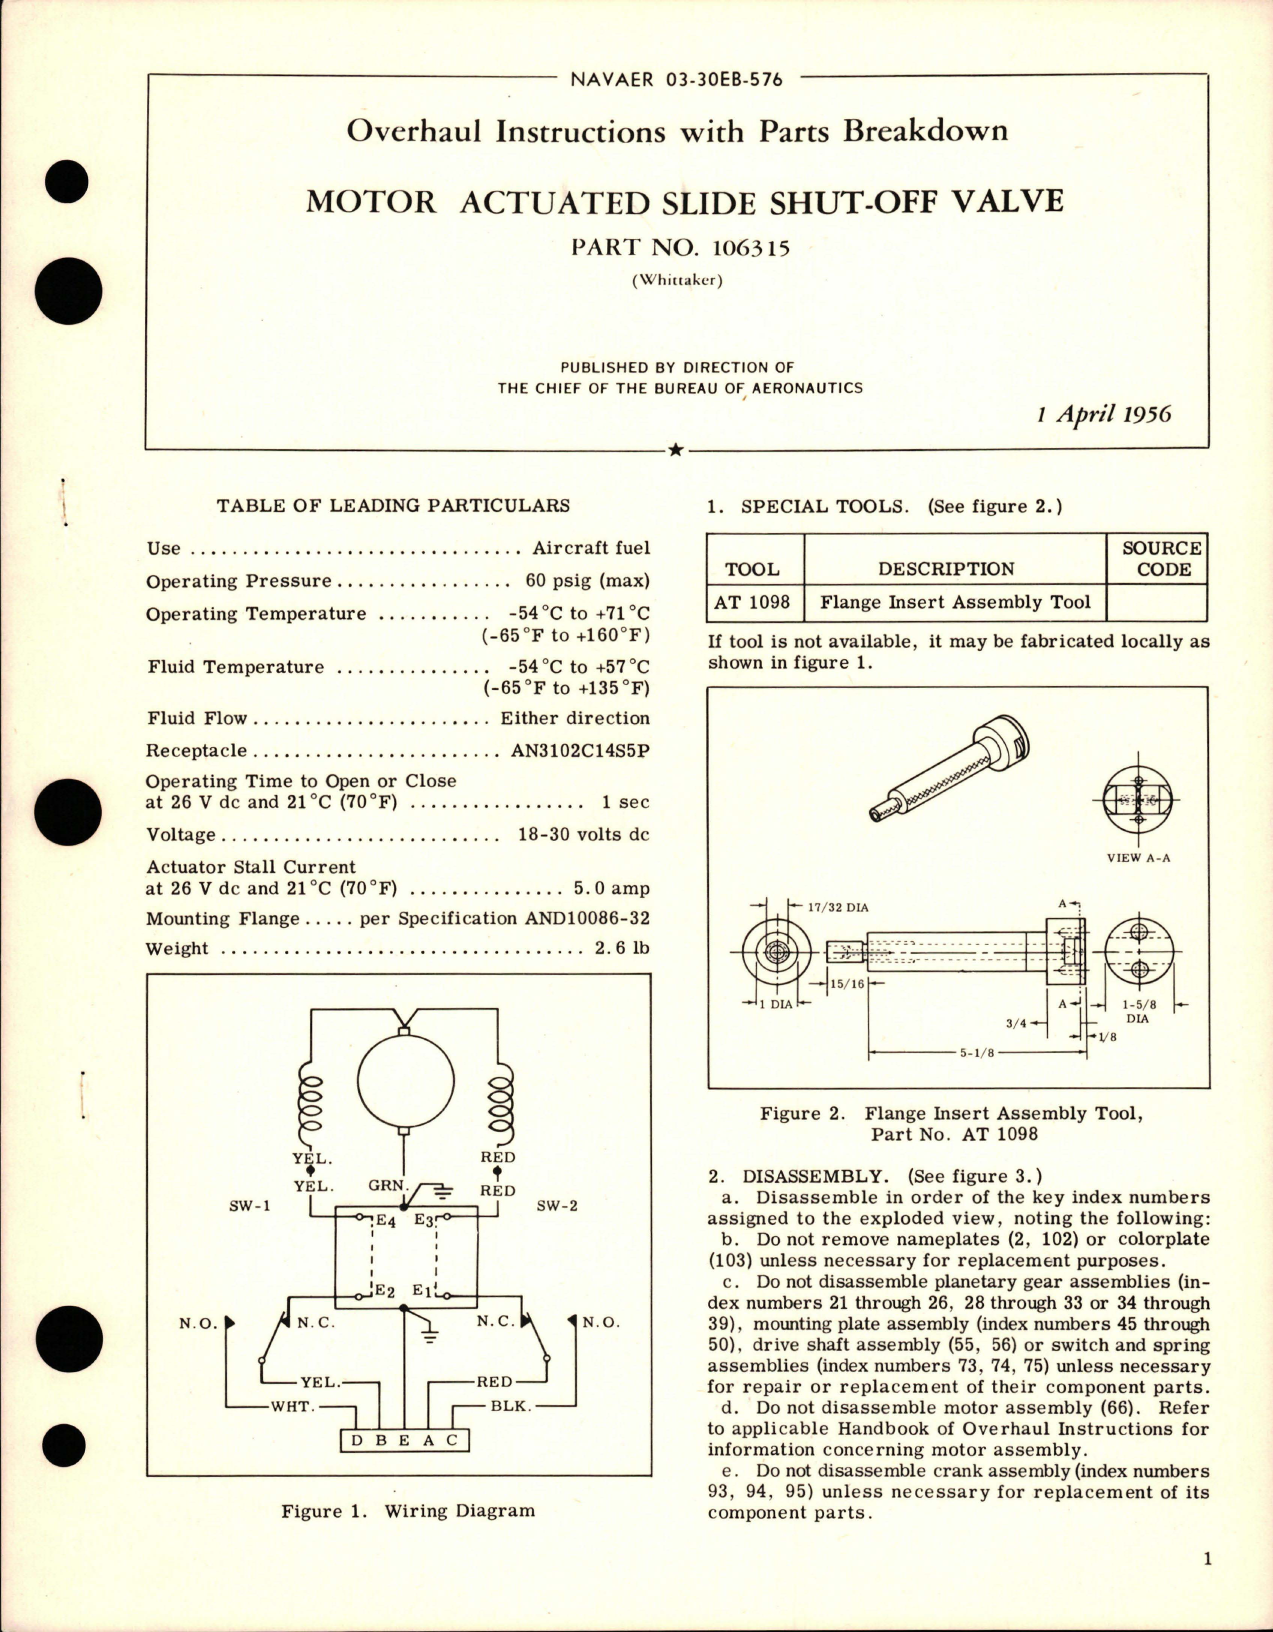 Sample page 1 from AirCorps Library document: Overhaul Instructions with Parts Breakdown for Motor Actuated Slide Shut-Off Valve - Part 106315